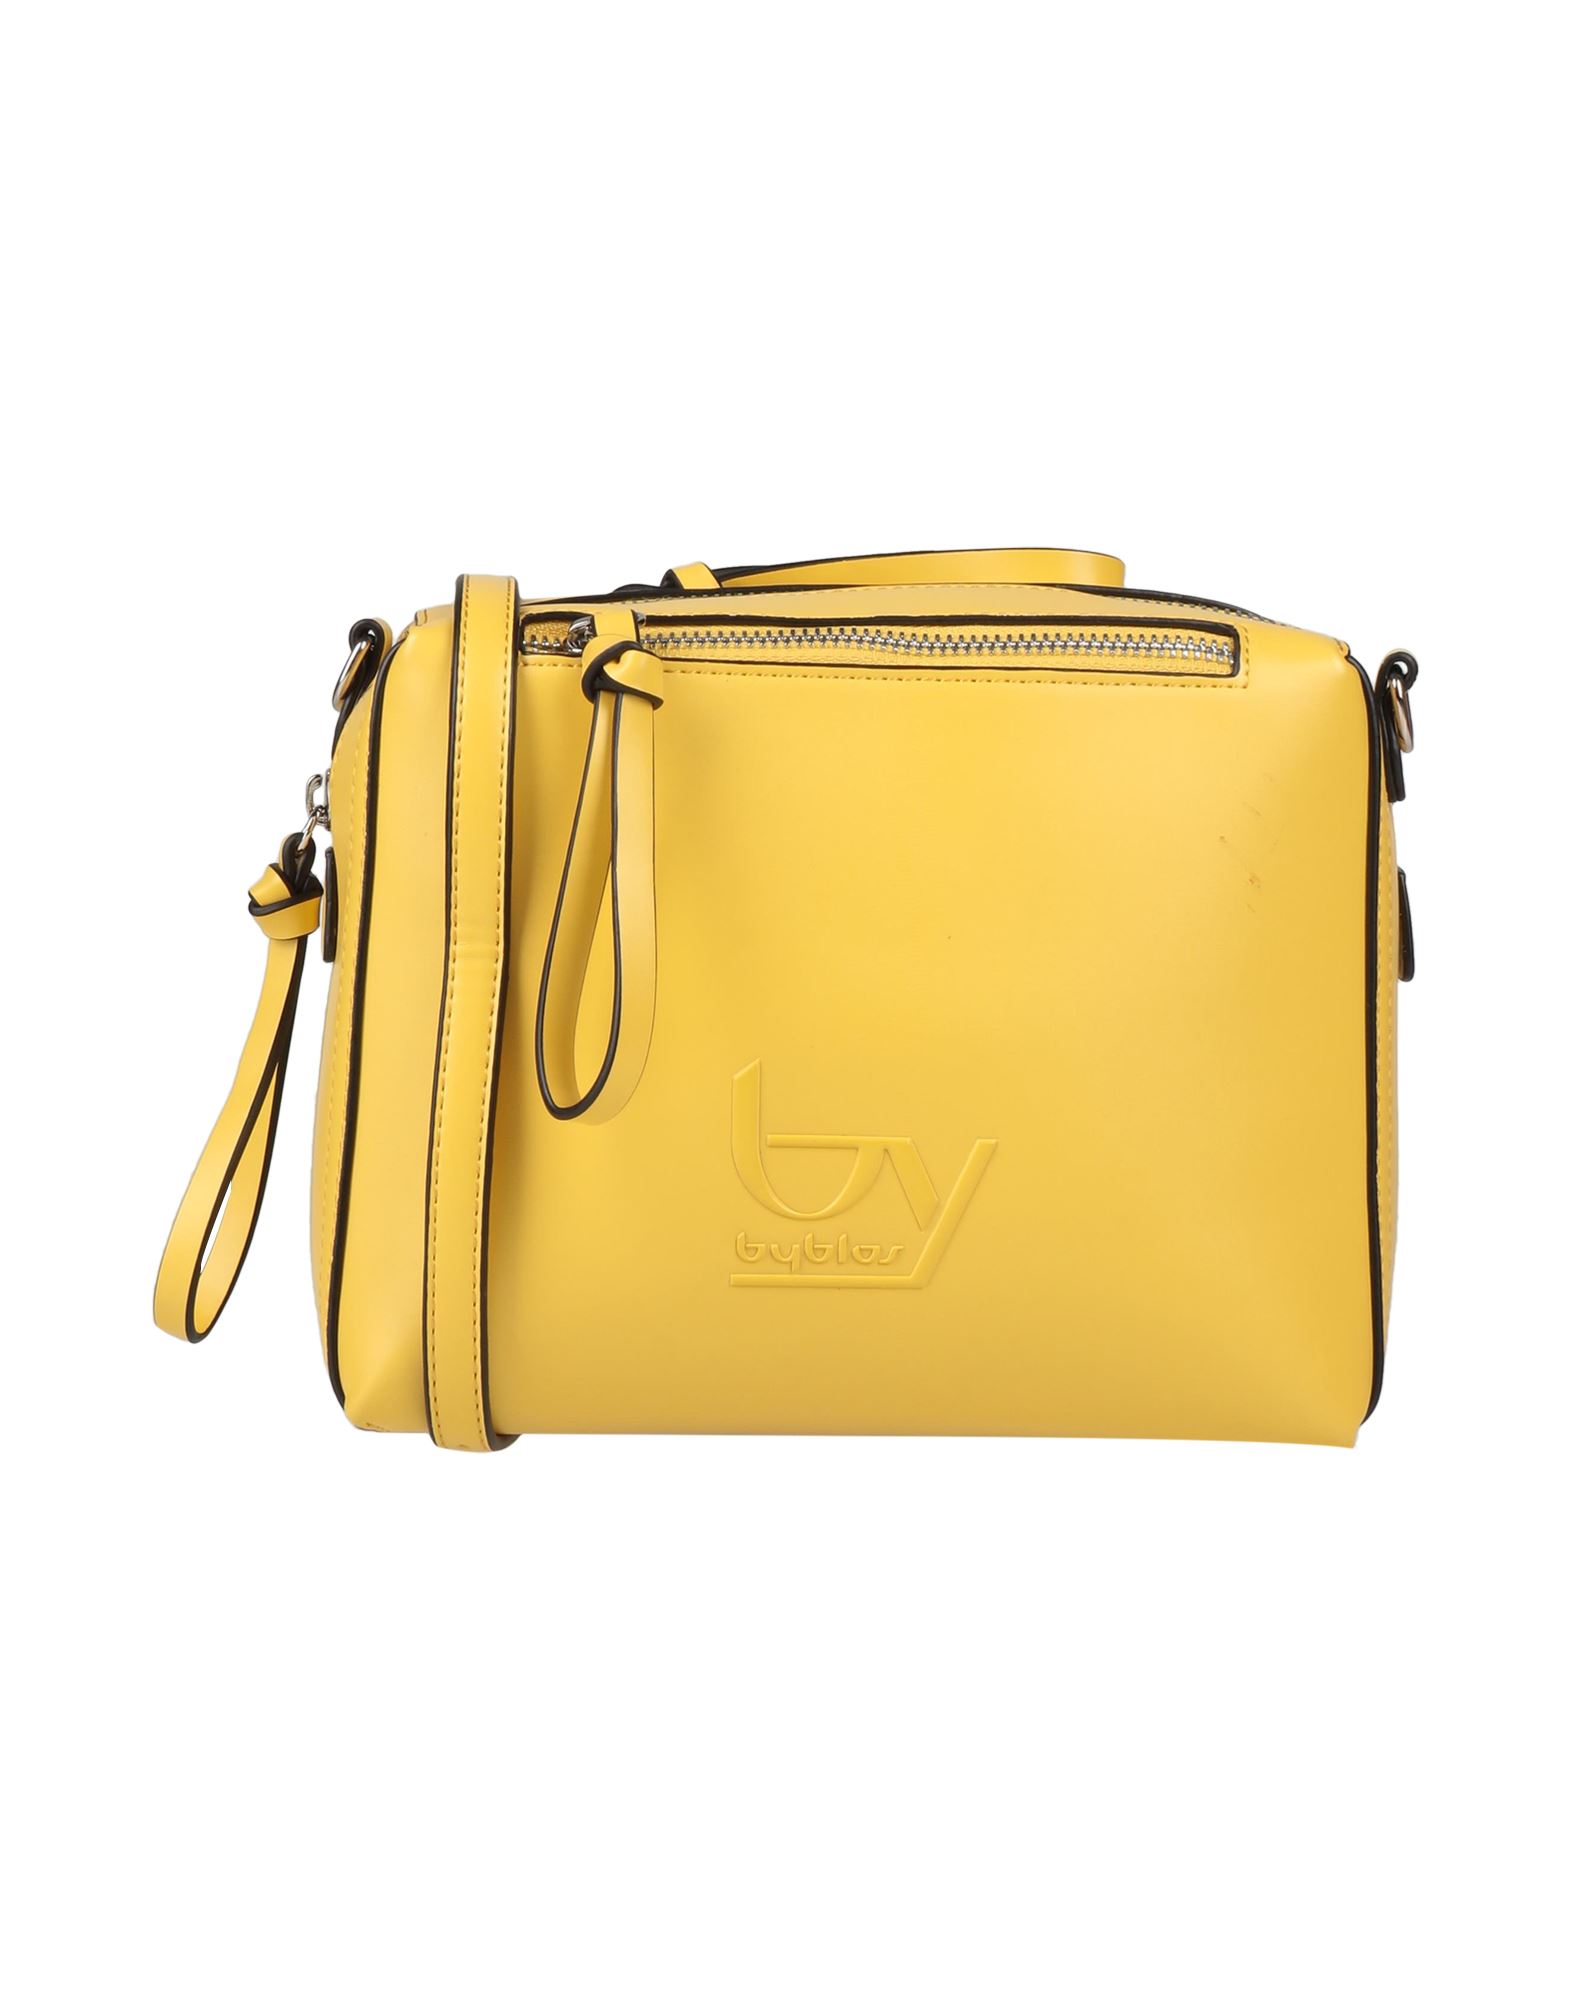 By Byblos Handbags In Yellow